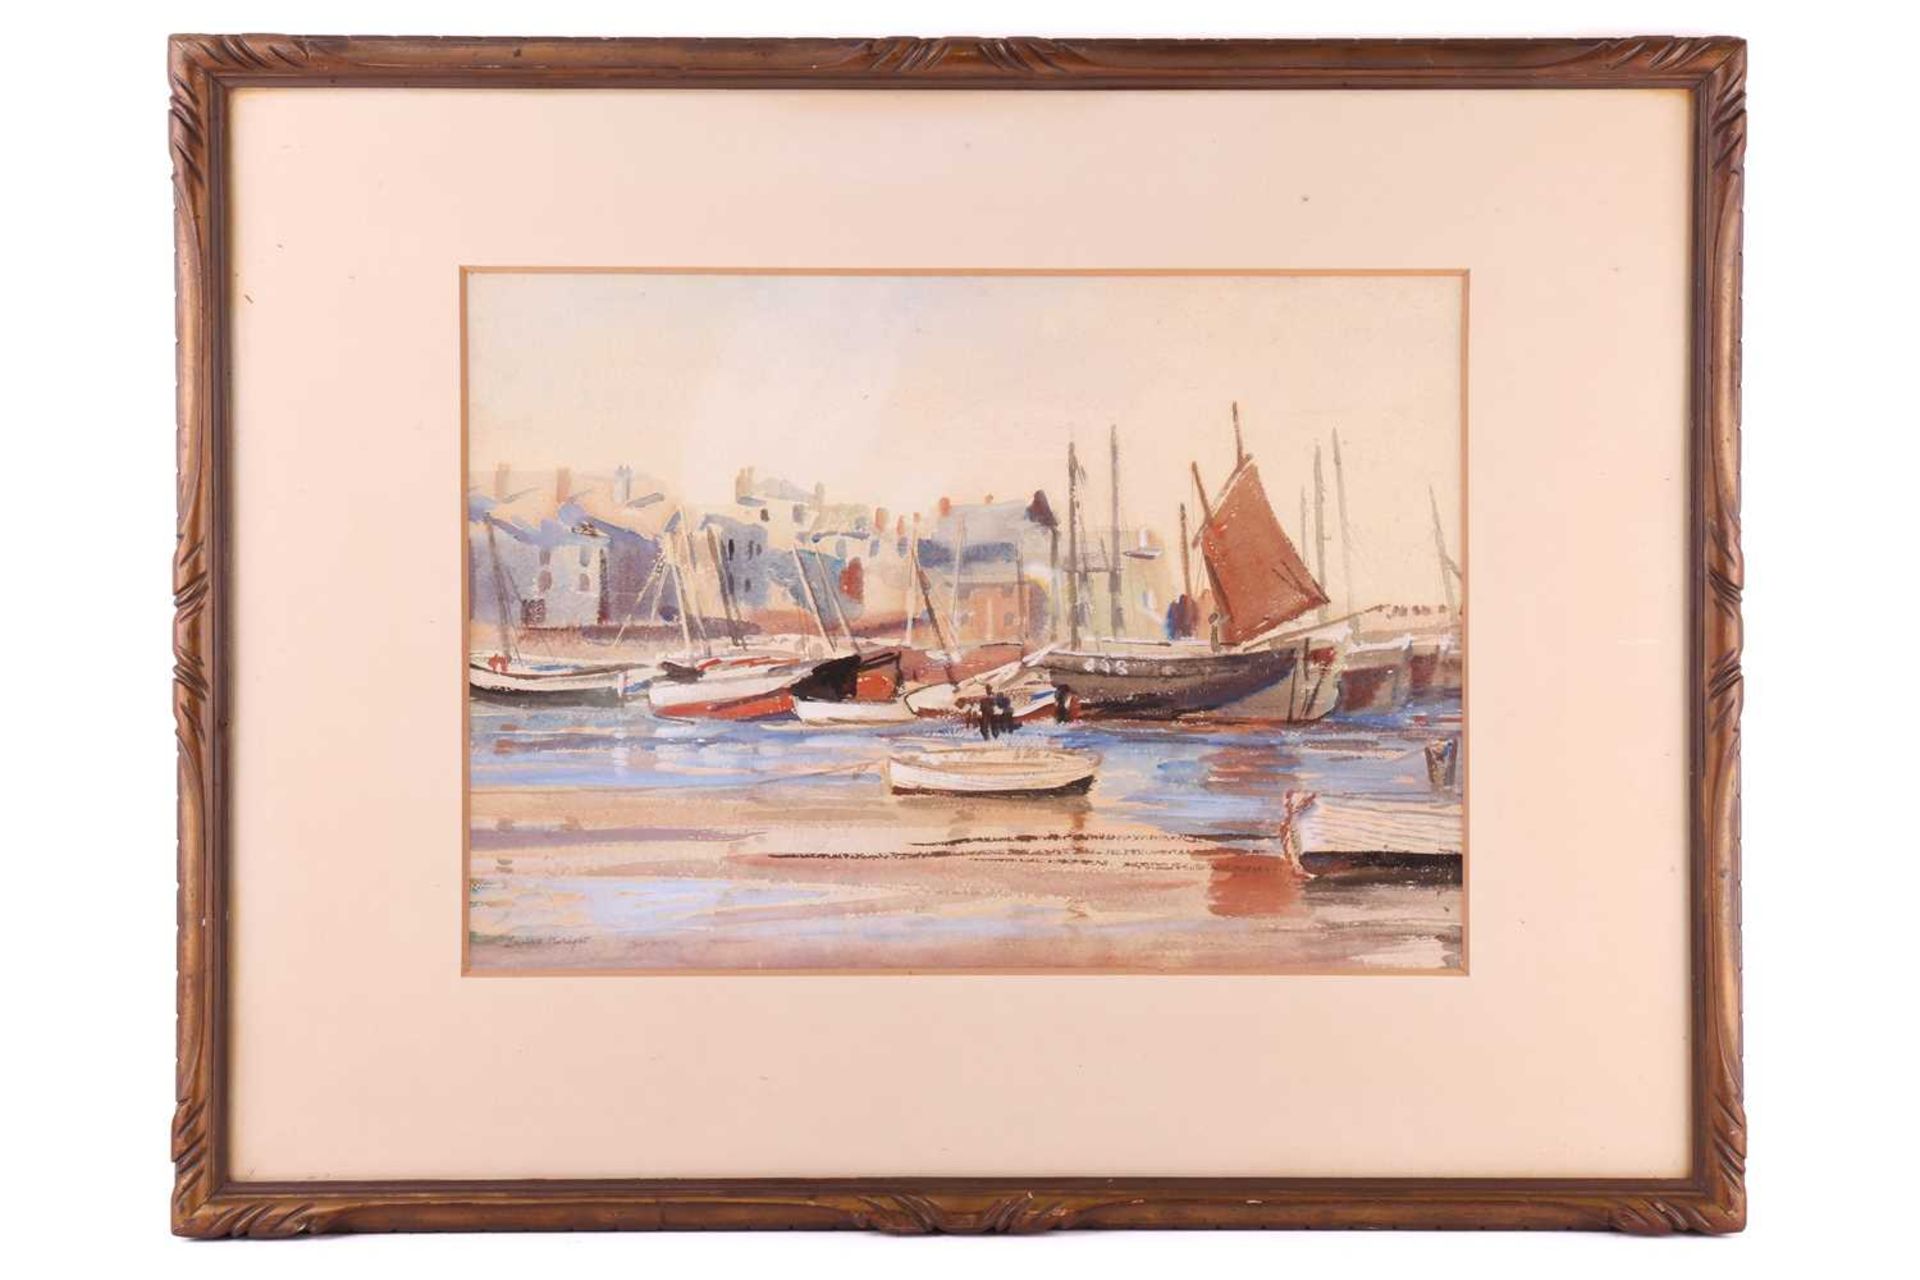 Dame Laura Knight (1877 - 1979), 'No. 1 Fishing Boats' - a harbour scene, signed Laura Knight in pen